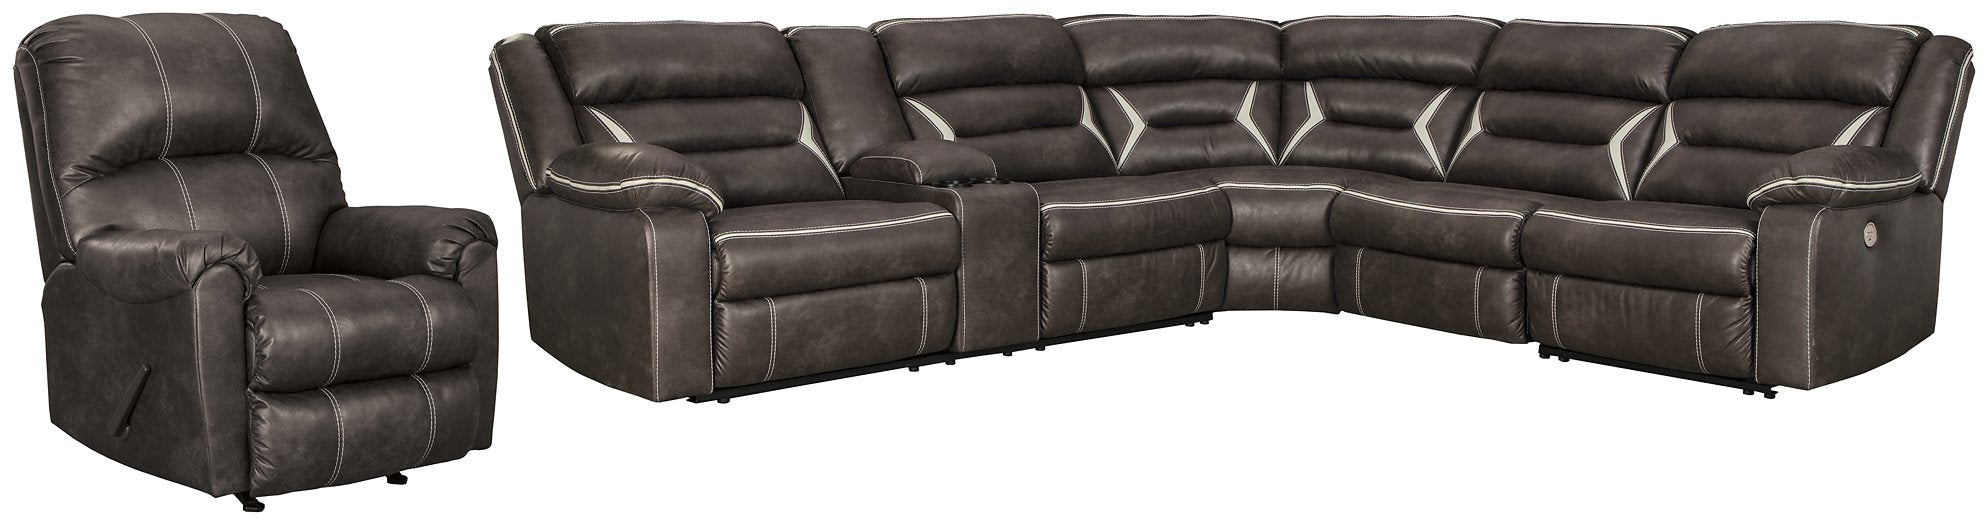 Kincord 5-Piece Upholstery Package